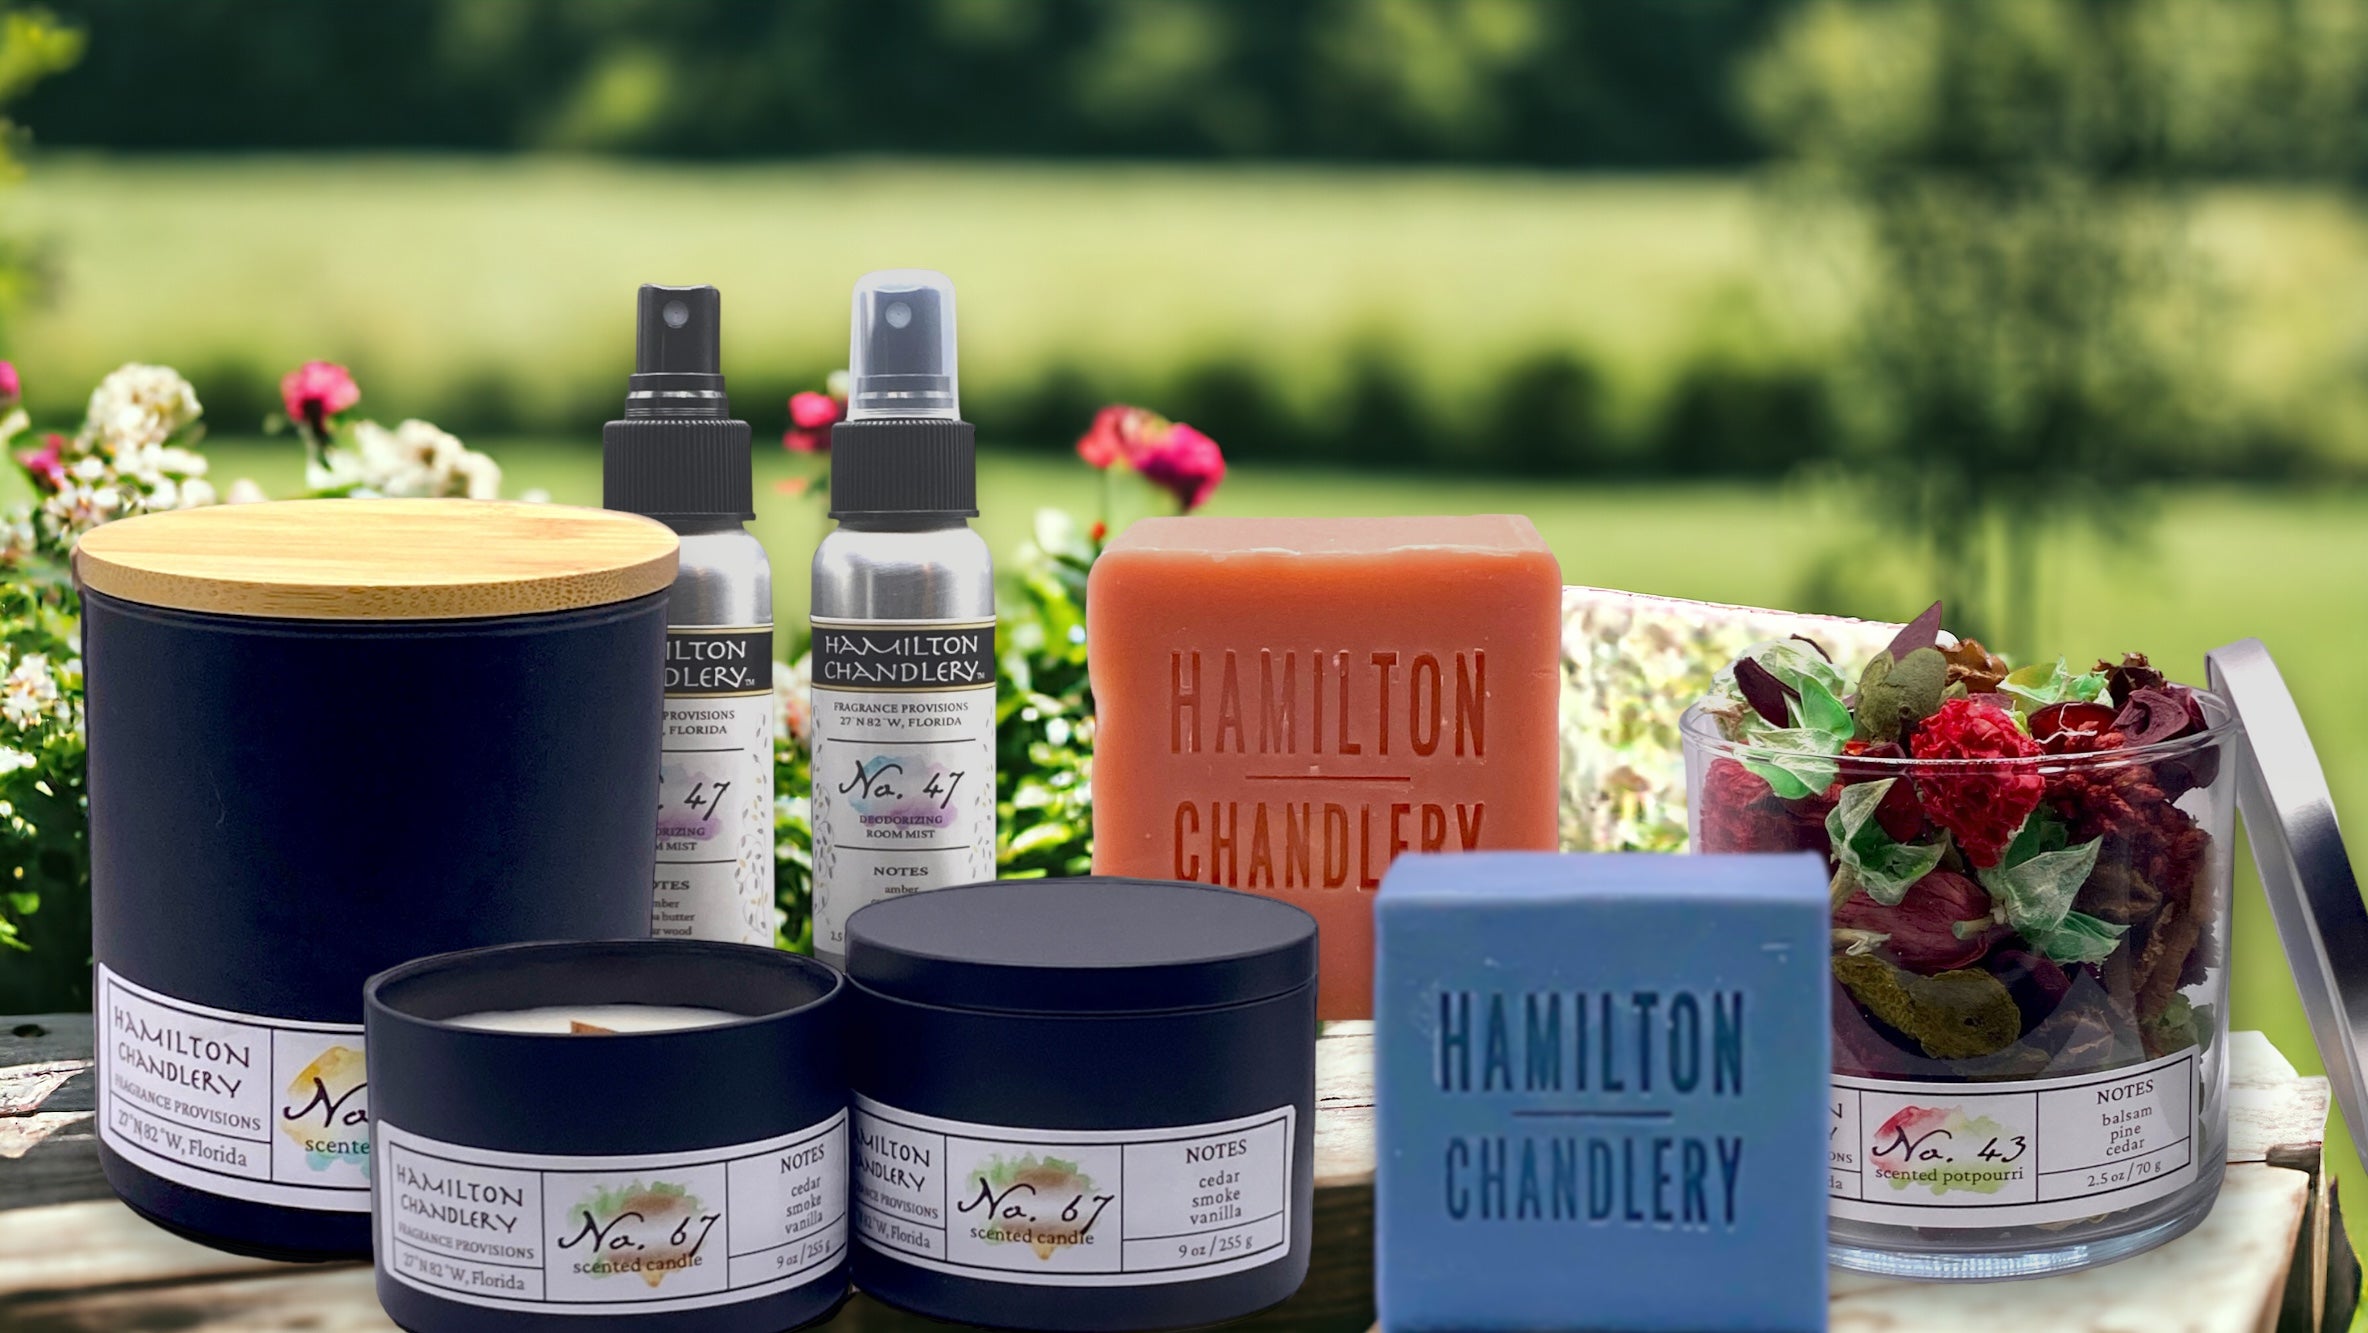 Top Selling Fragrance Provisions in Outdoor Floral Setting | Hamilton Chandlery